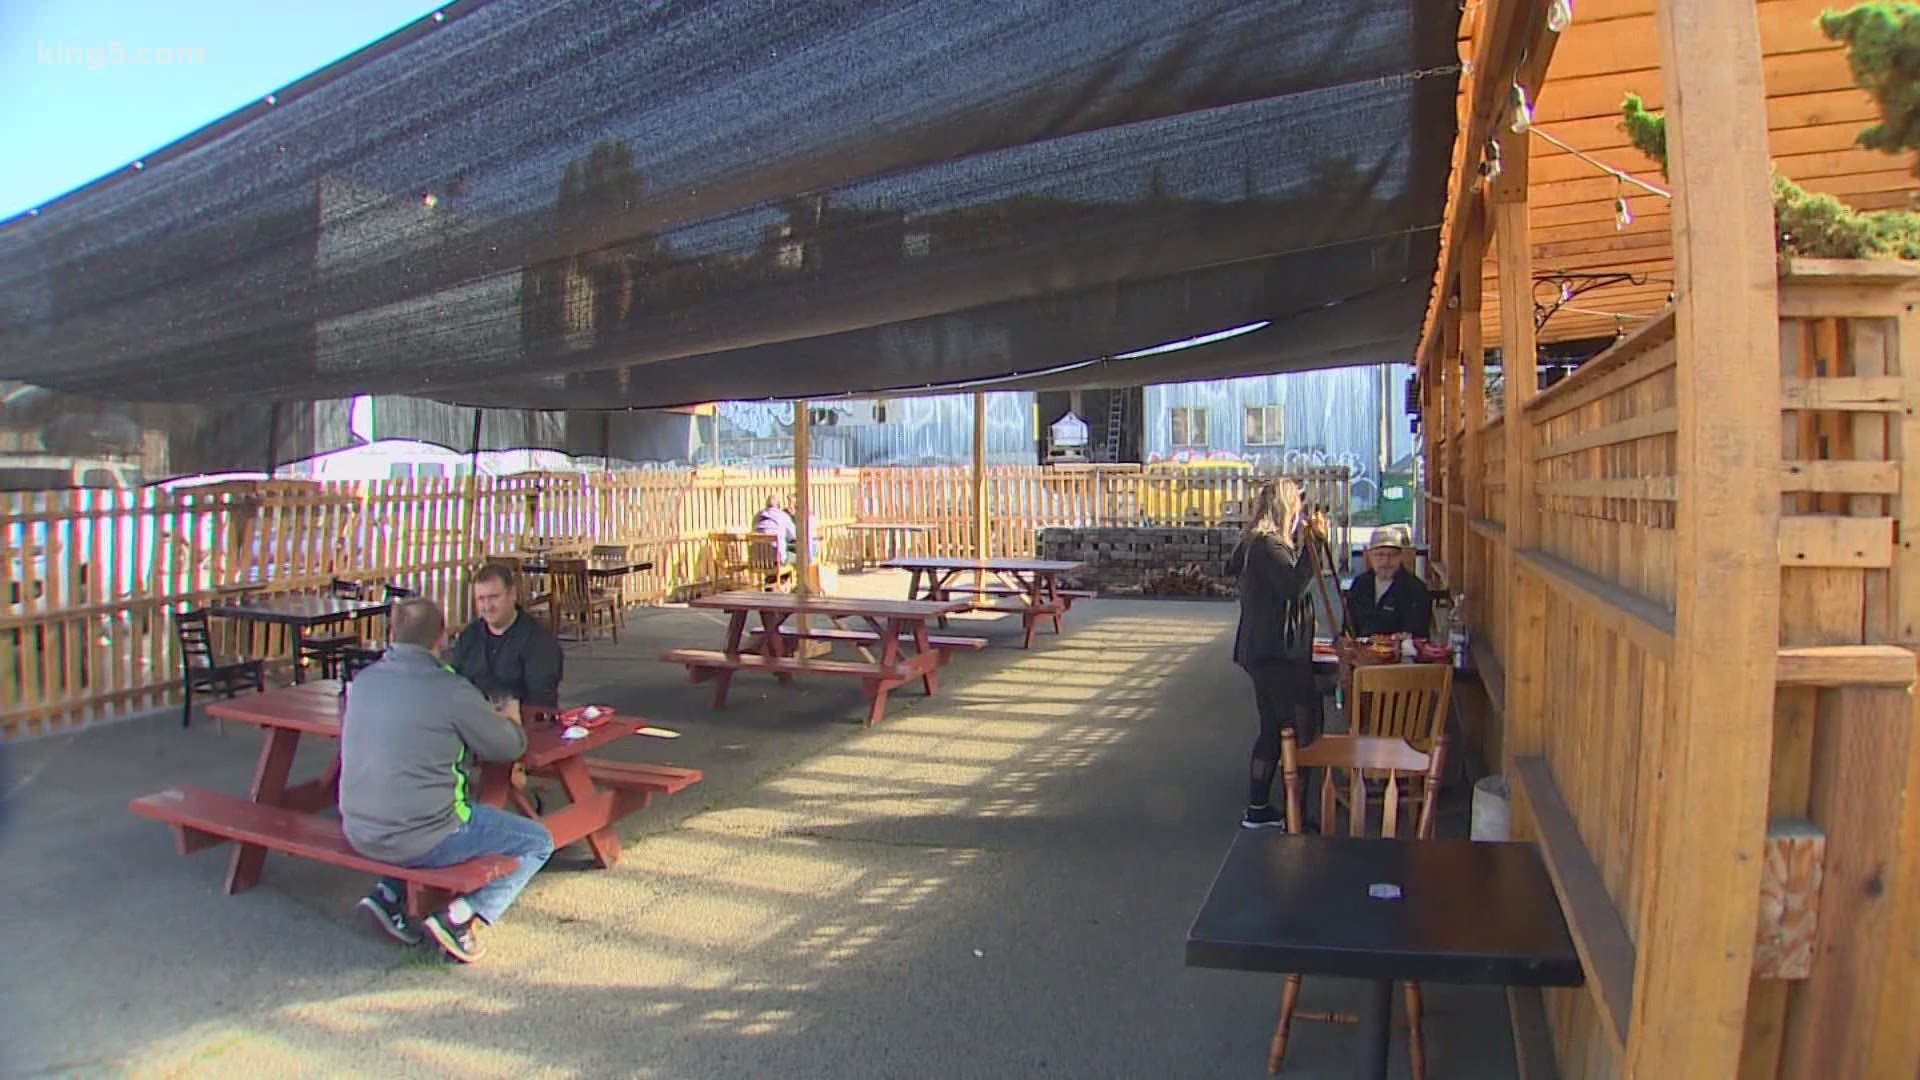 Businesses can make outdoor dining an extension of their indoor dining. The permit will also allow tents and heaters.